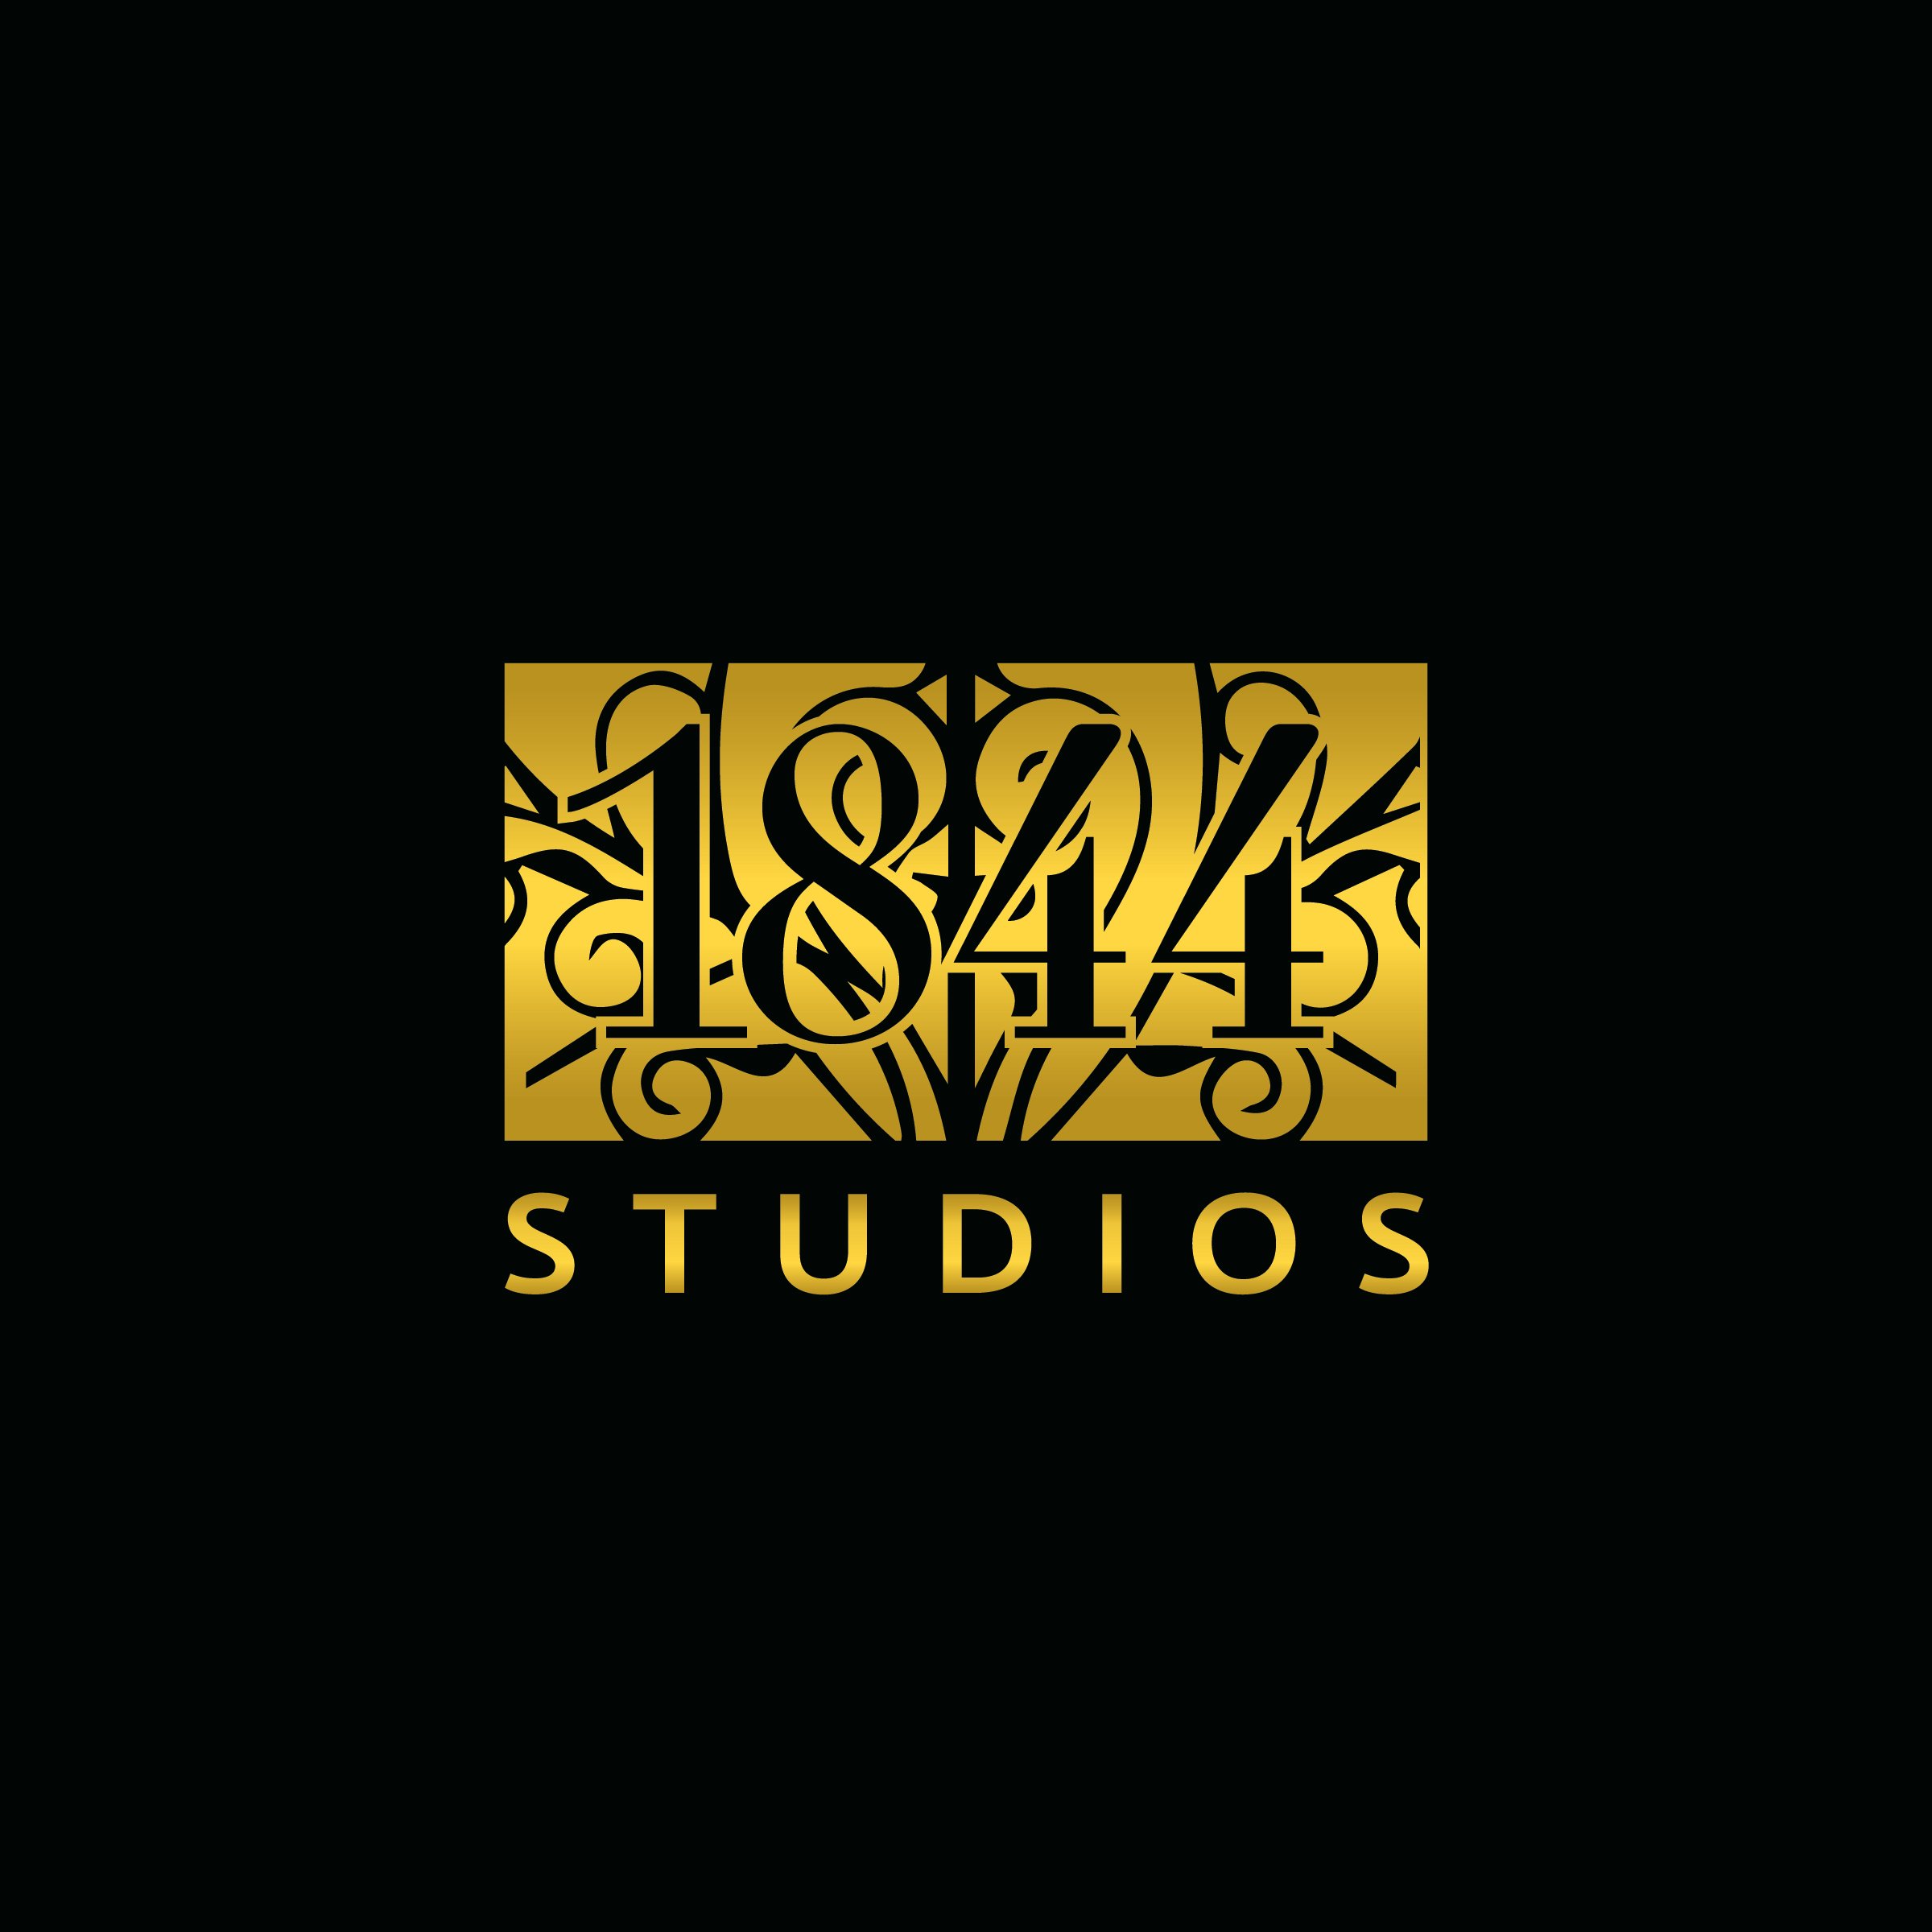 1844 Studios is a content creation film production company whose aim is to develop thought-provoking content which resonates internationally.